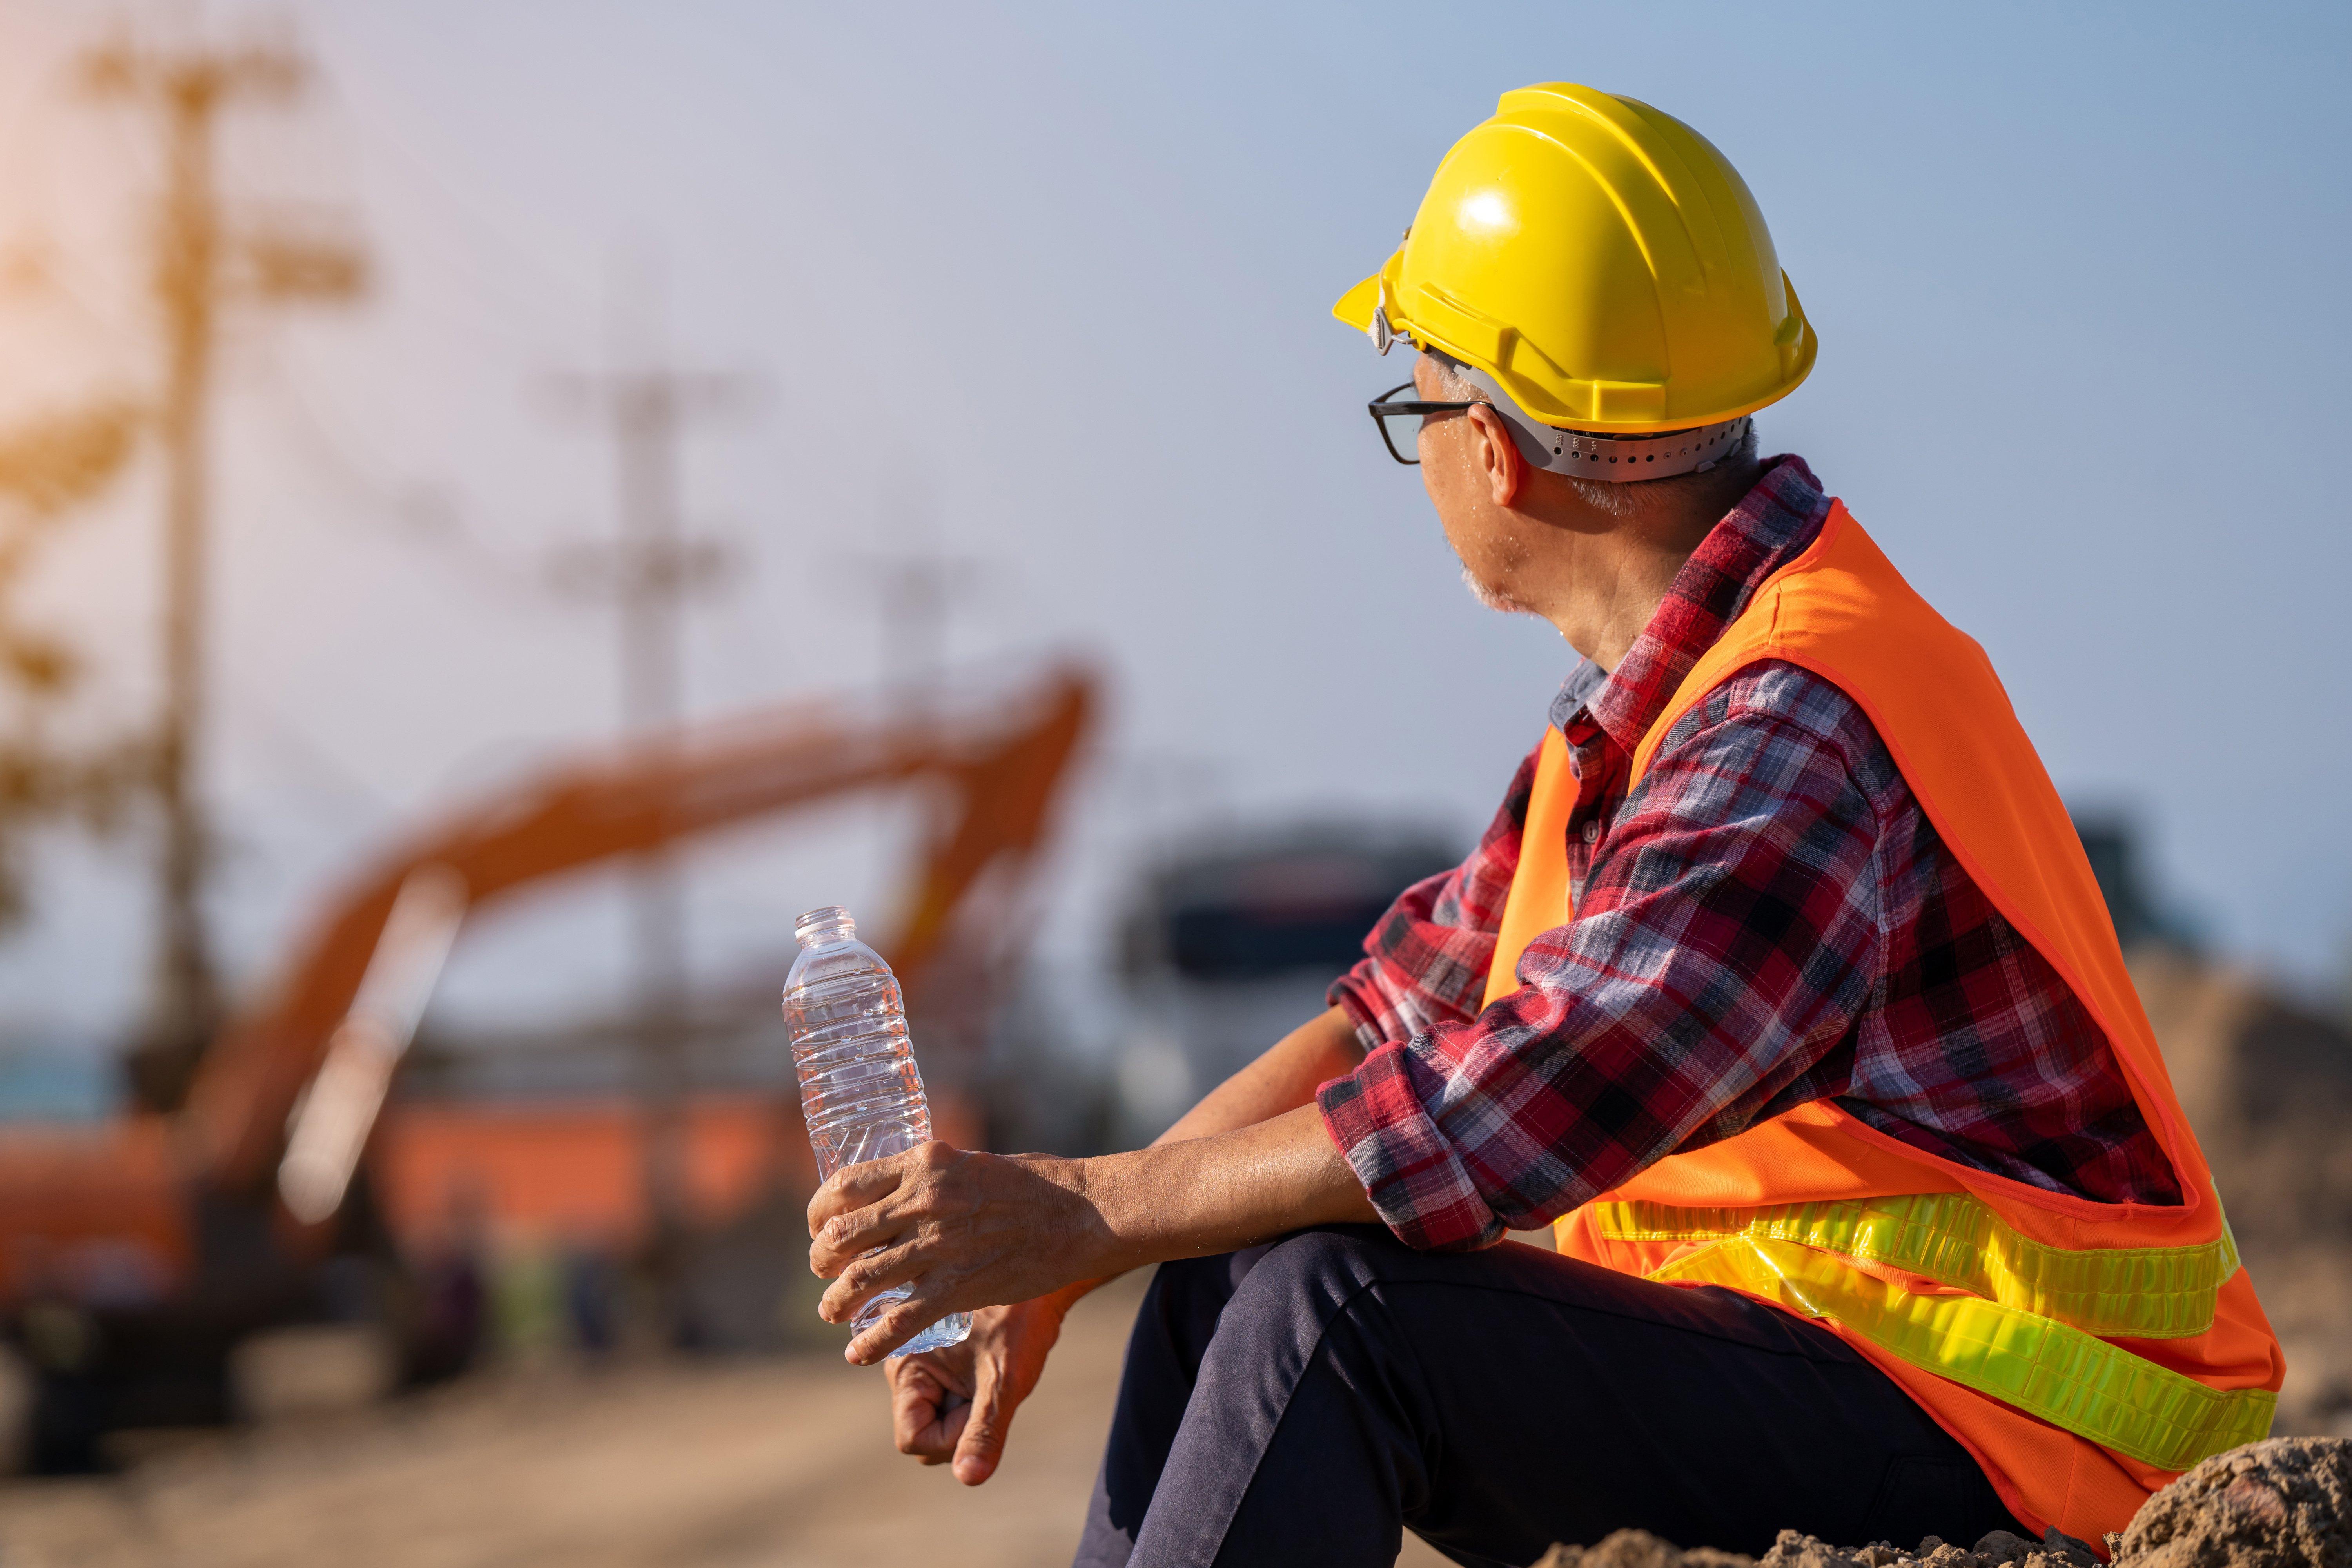 A construction worker wearing a hard hat and reflective vest holds an open water bottle while sitting on a construction jobsite.